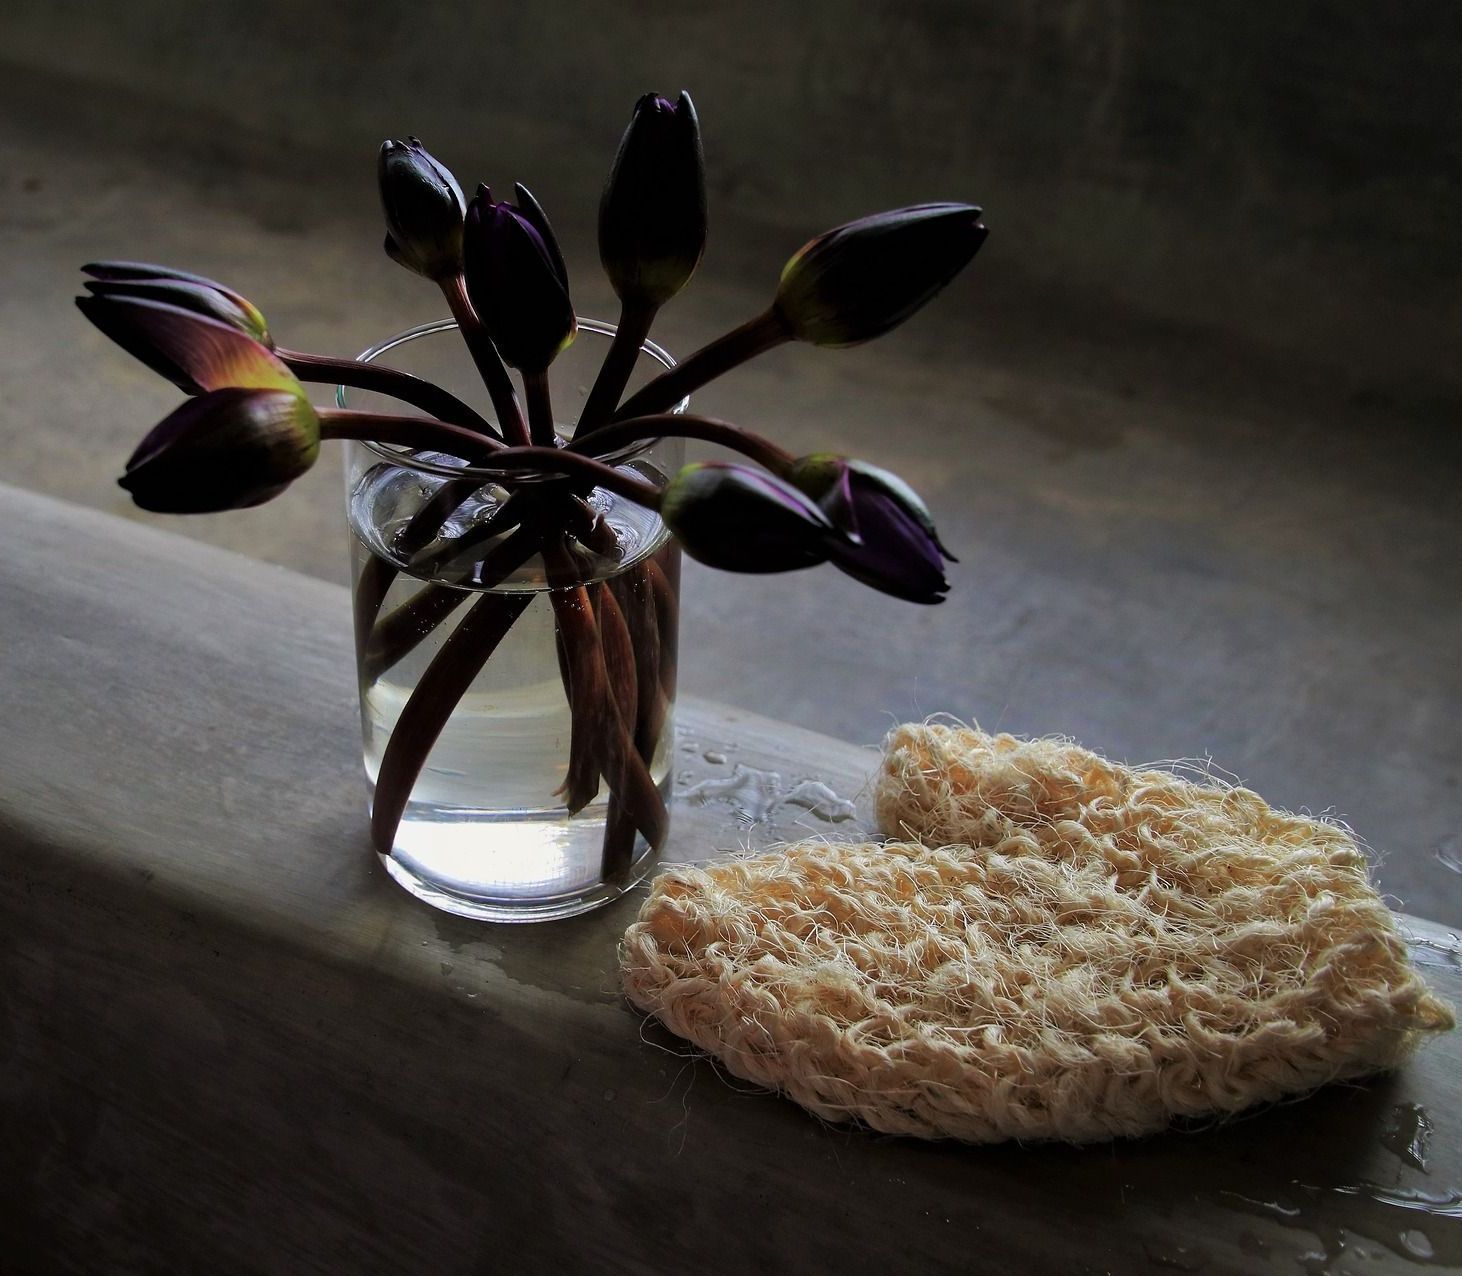 photo of an indoor plant showing several flowers about to bloom in a glass with water and a foam beside it